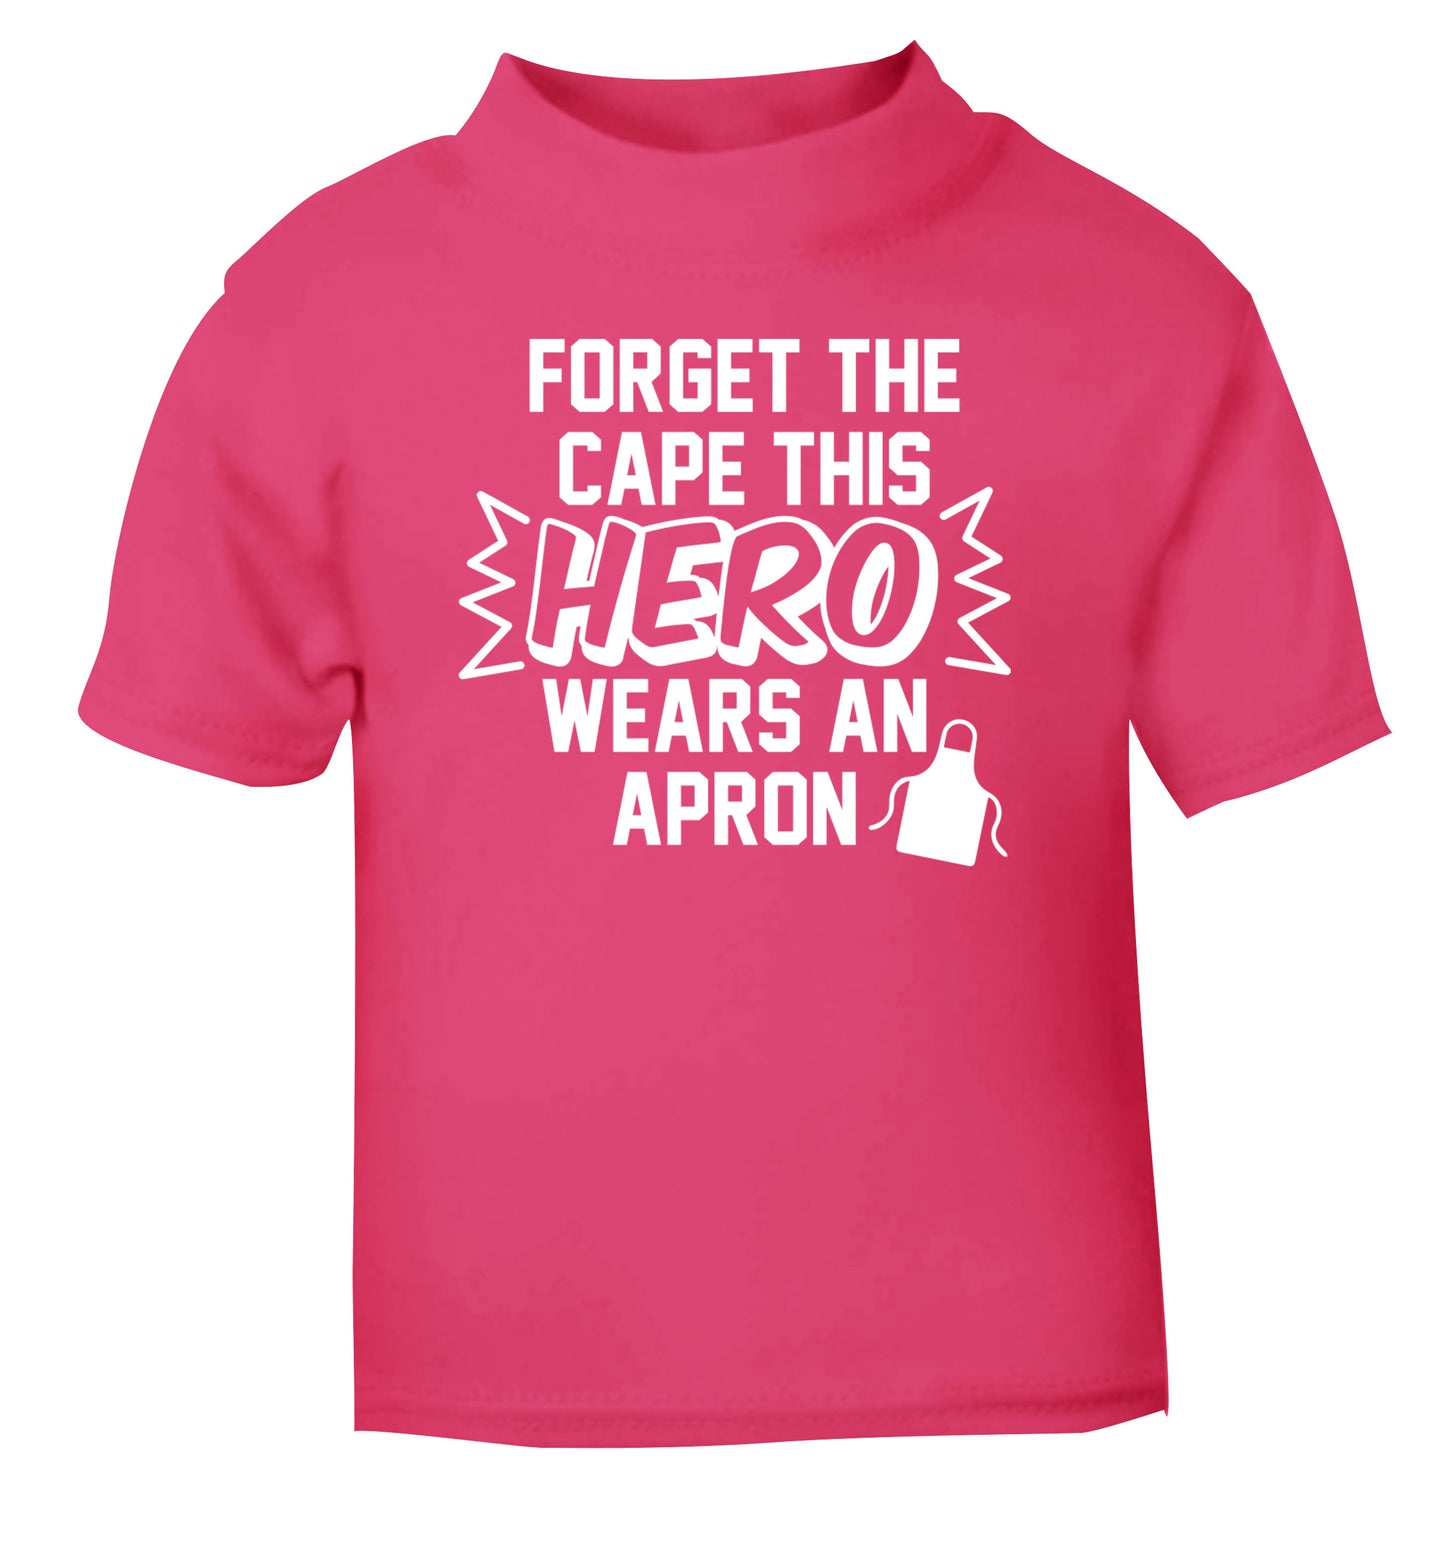 Forget the cape this hero wears an apron pink Baby Toddler Tshirt 2 Years